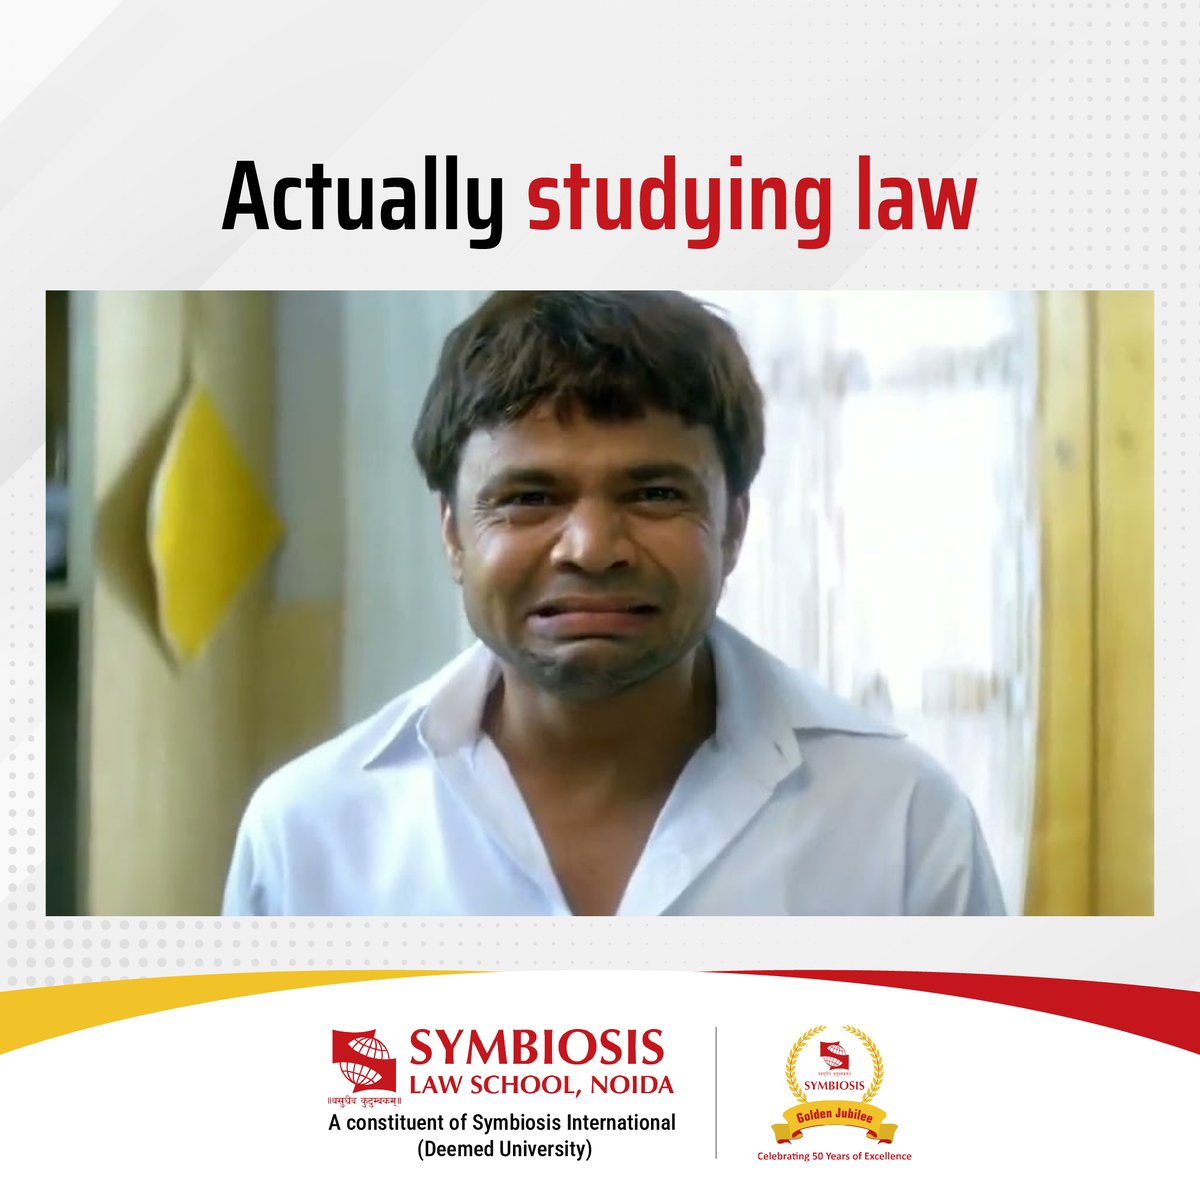 Is this what we call life? . . . #sls #symbiosis #slsnoida #lawschool #meme #students #relatable #funnymeme #lawstudents